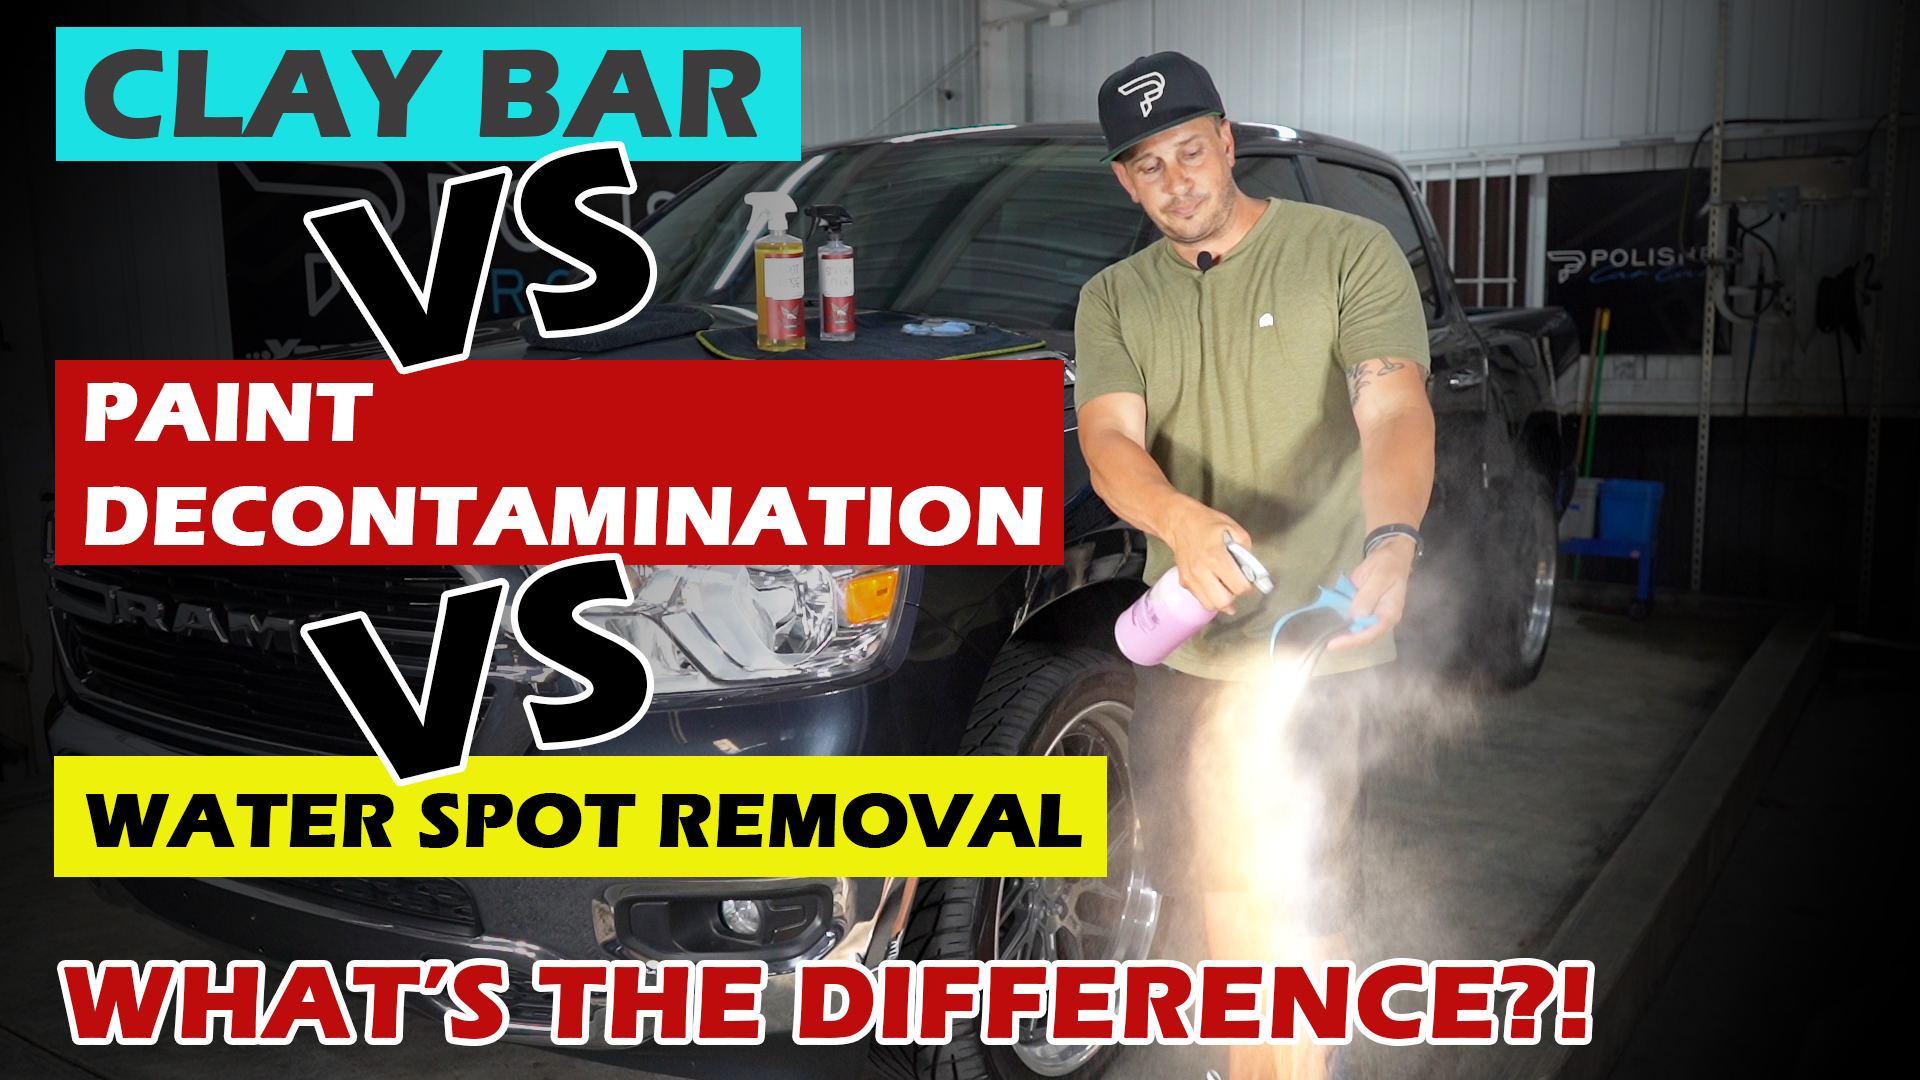 Clay Bar VS Paint Decontamination VS Water Spot Removal - What's The Difference?!